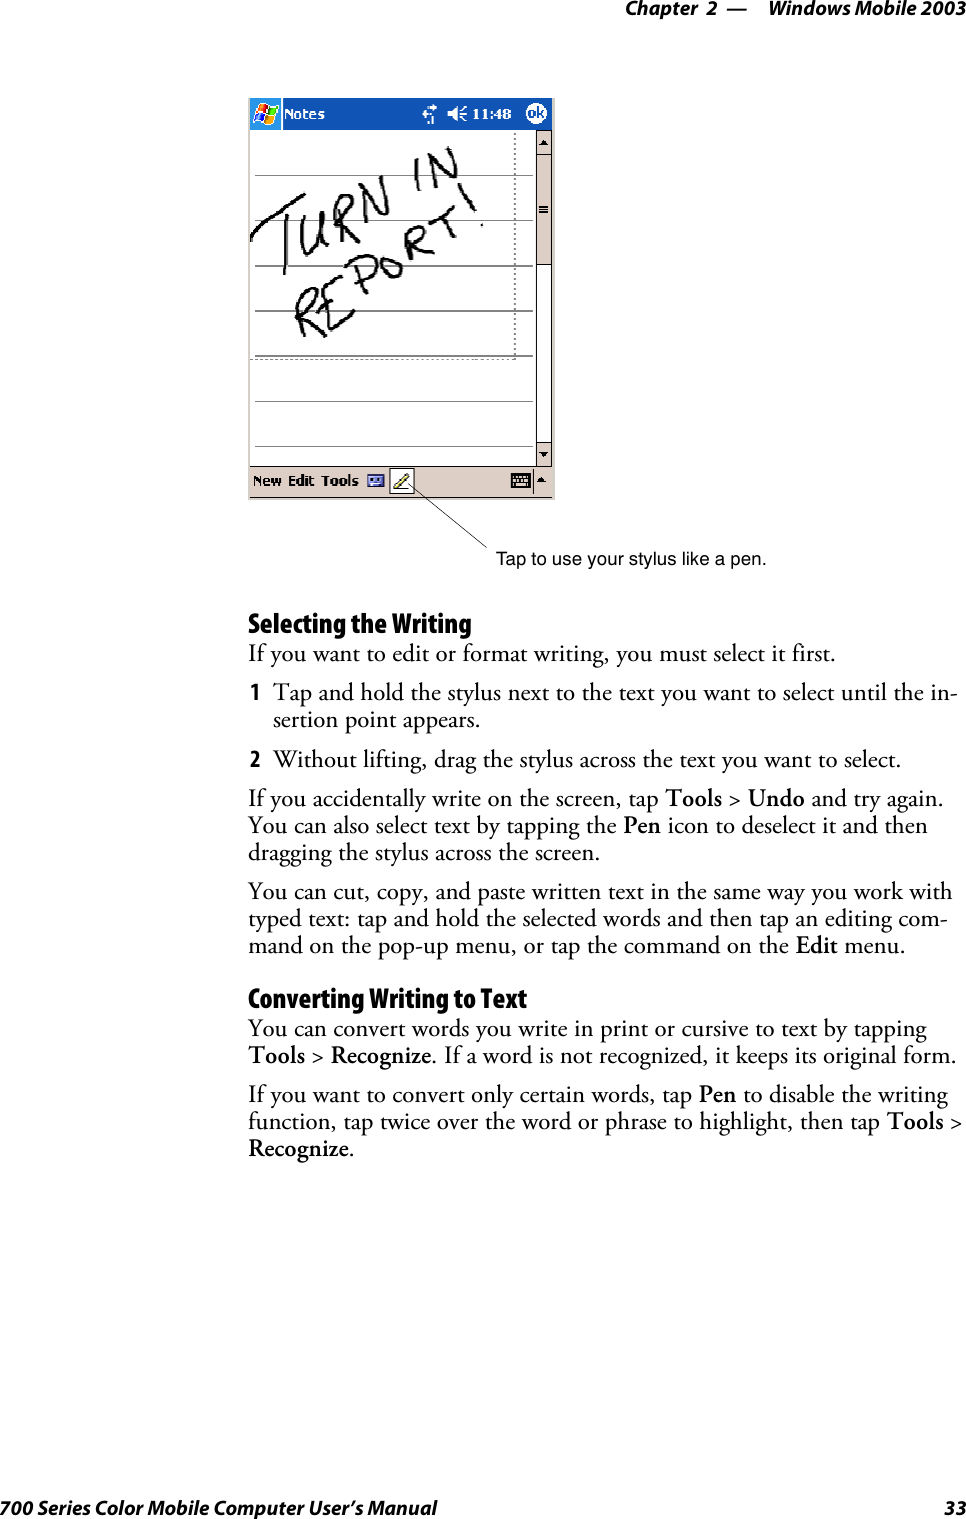 Windows Mobile 2003—Chapter 233700 Series Color Mobile Computer User’s ManualTap to use your stylus like a pen.Selecting the WritingIf you want to edit or format writing, you must select it first.1Tap and hold the stylus next to the text you want to select until the in-sertion point appears.2Without lifting, drag the stylus across the text you want to select.If you accidentally write on the screen, tap Tools &gt;Undo and try again.You can also select text by tapping the Pen icon to deselect it and thendragging the stylus across the screen.You can cut, copy, and paste written text in the same way you work withtyped text: tap and hold the selected words and then tap an editing com-mand on the pop-up menu, or tap the command on the Edit menu.Converting Writing to TextYou can convert words you write in print or cursive to text by tappingTools &gt;Recognize. If a word is not recognized, it keeps its original form.If you want to convert only certain words, tap Pen to disable the writingfunction, tap twice over the word or phrase to highlight, then tap Tools &gt;Recognize.